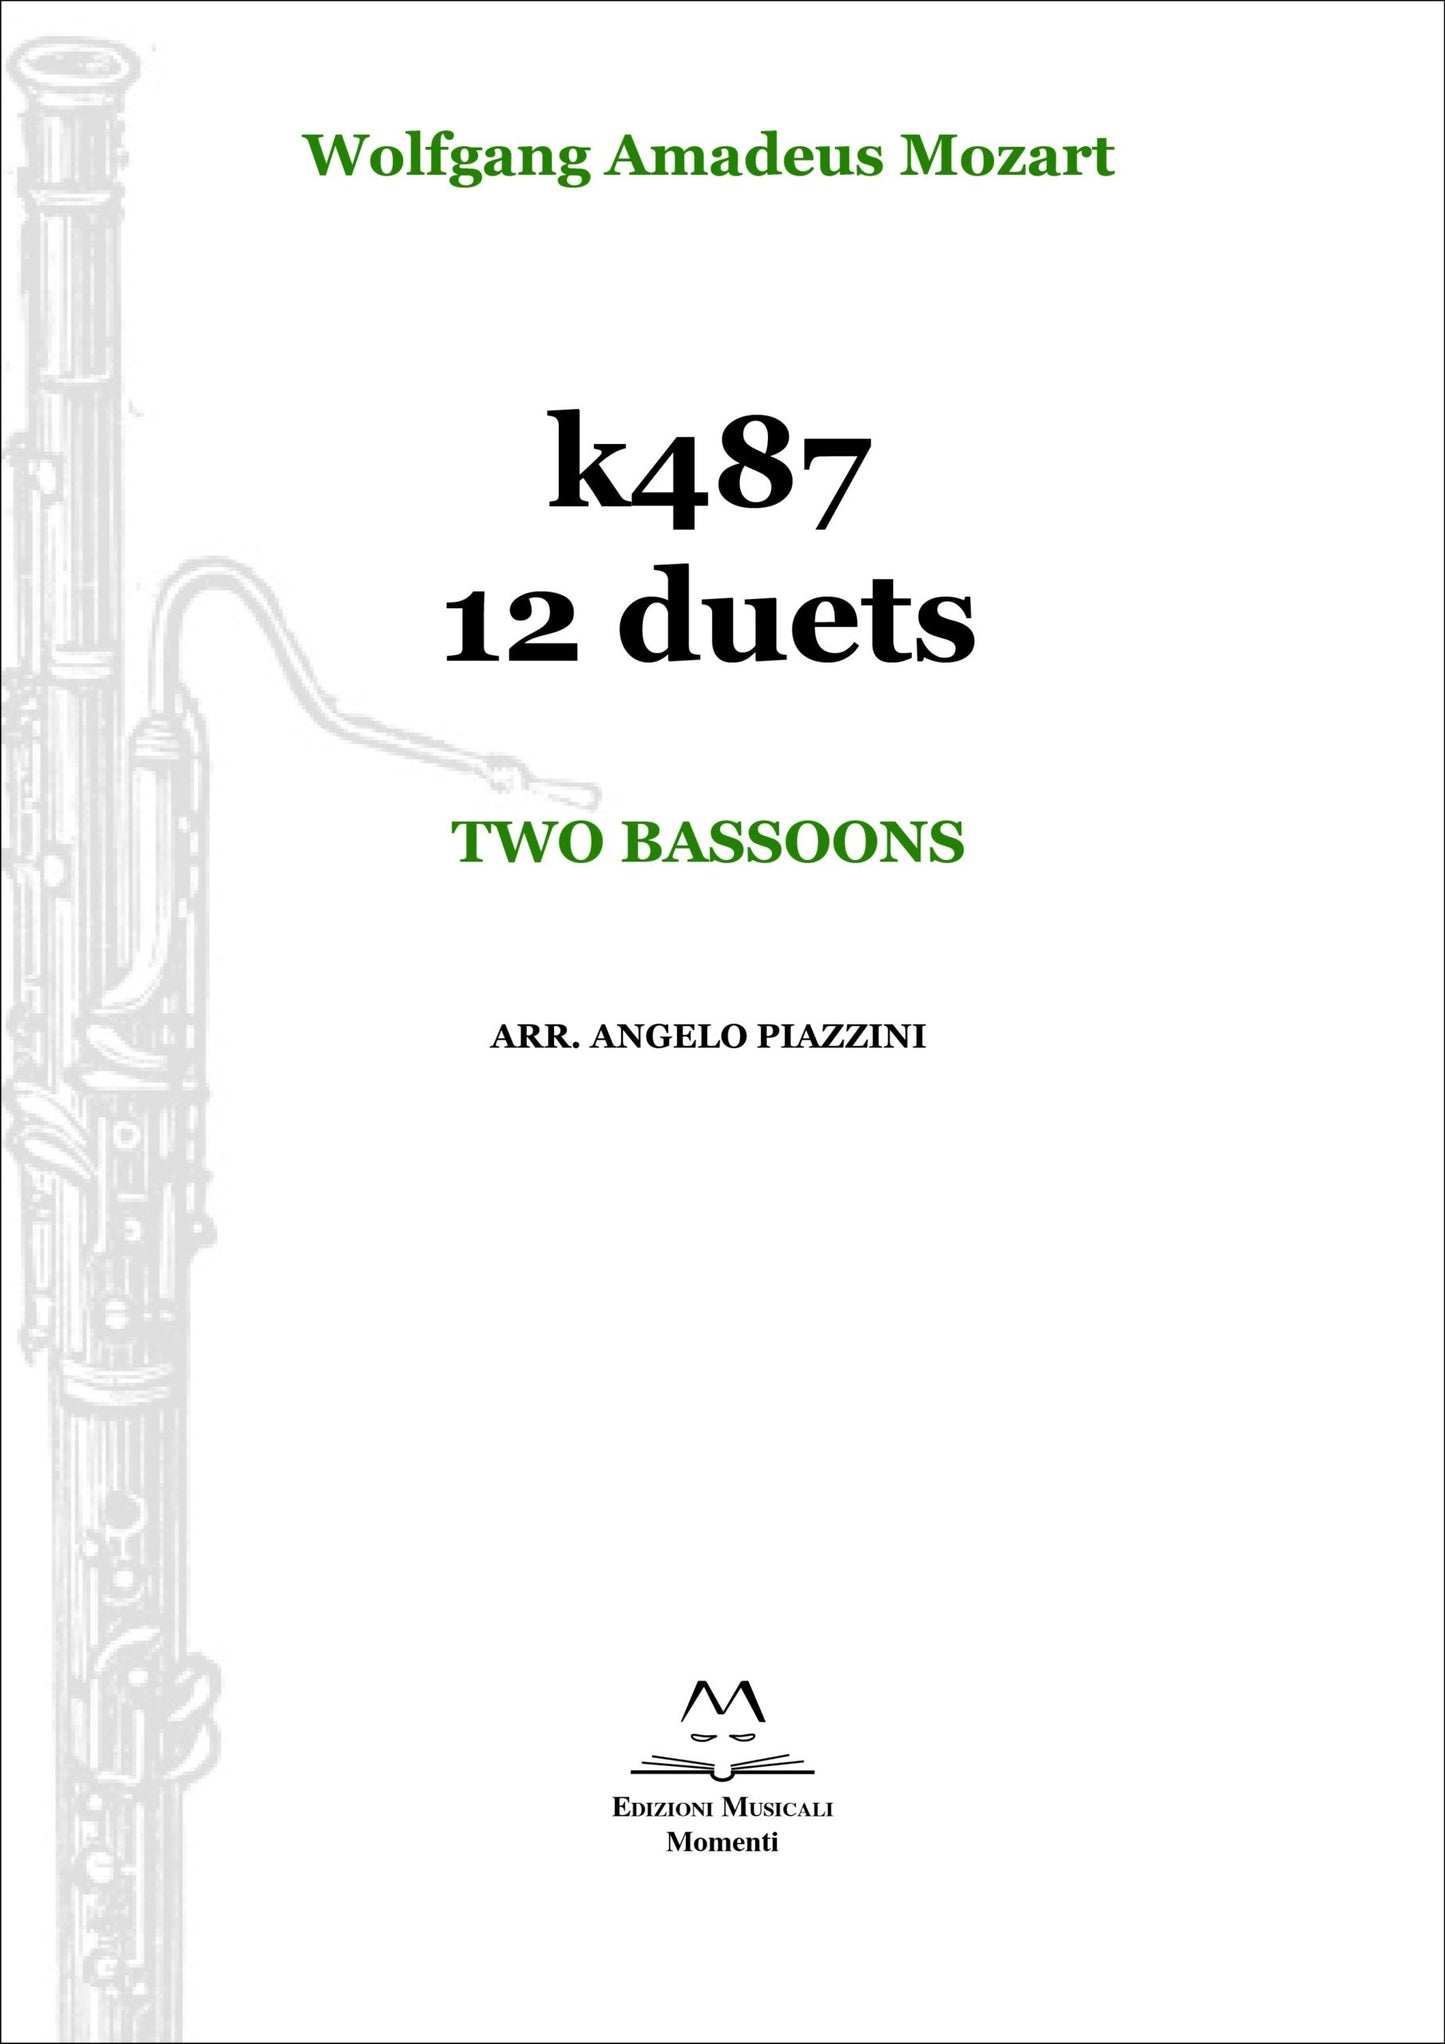 K487 12 duets. Two bassoons arr. Angelo Piazzini